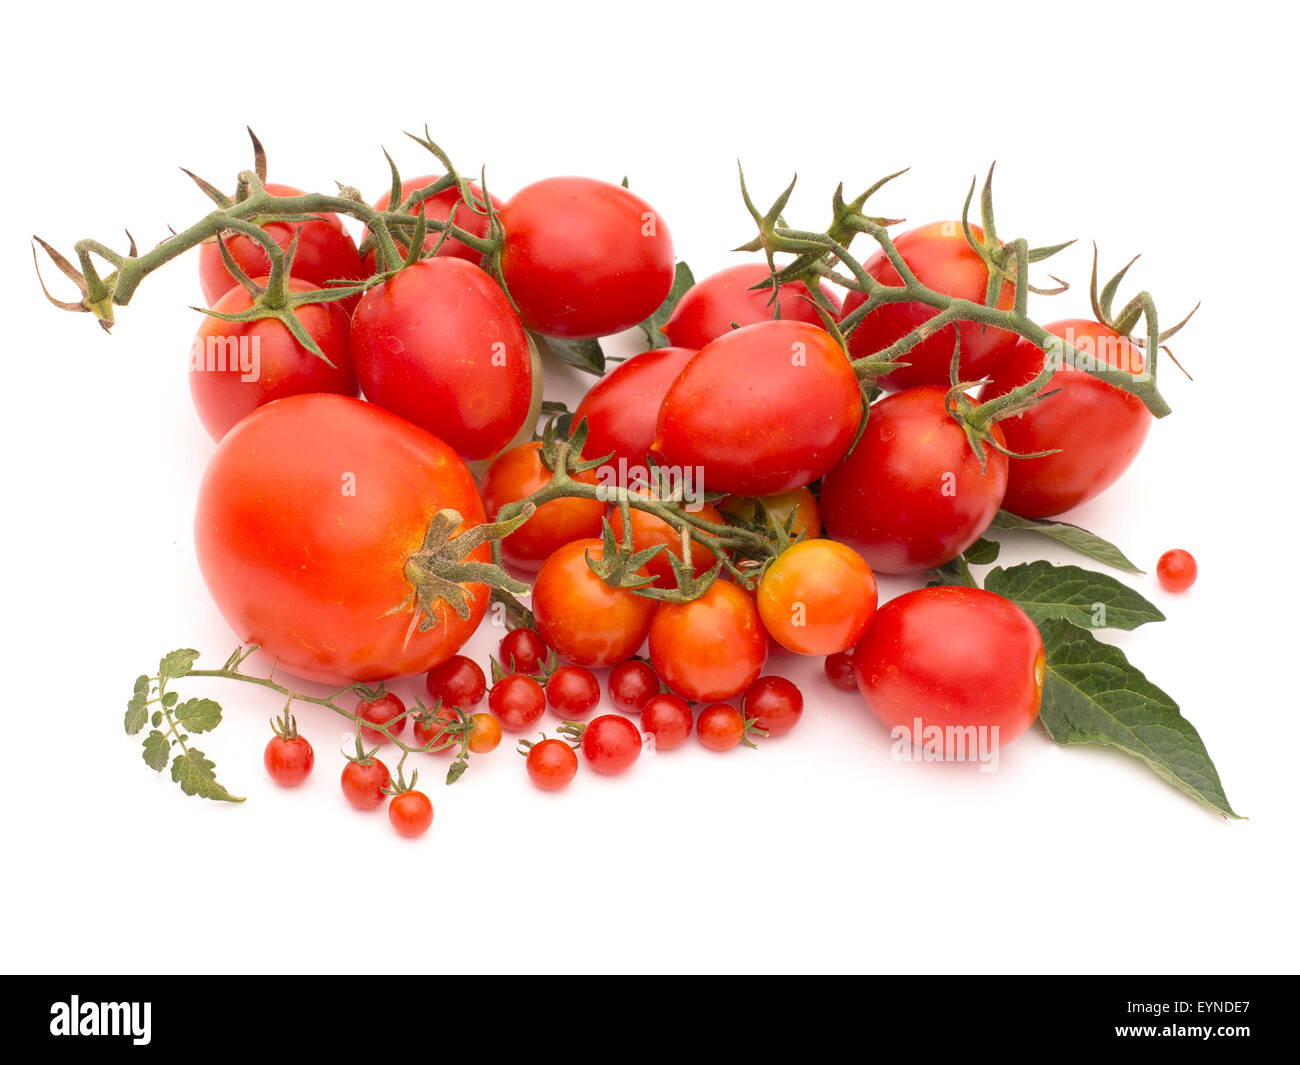 Genuine organic tomatoes from my garden, not all perfect. Include tiny Currant tomatoes, Lycopersicon pimpinellifolium. Stock Photo